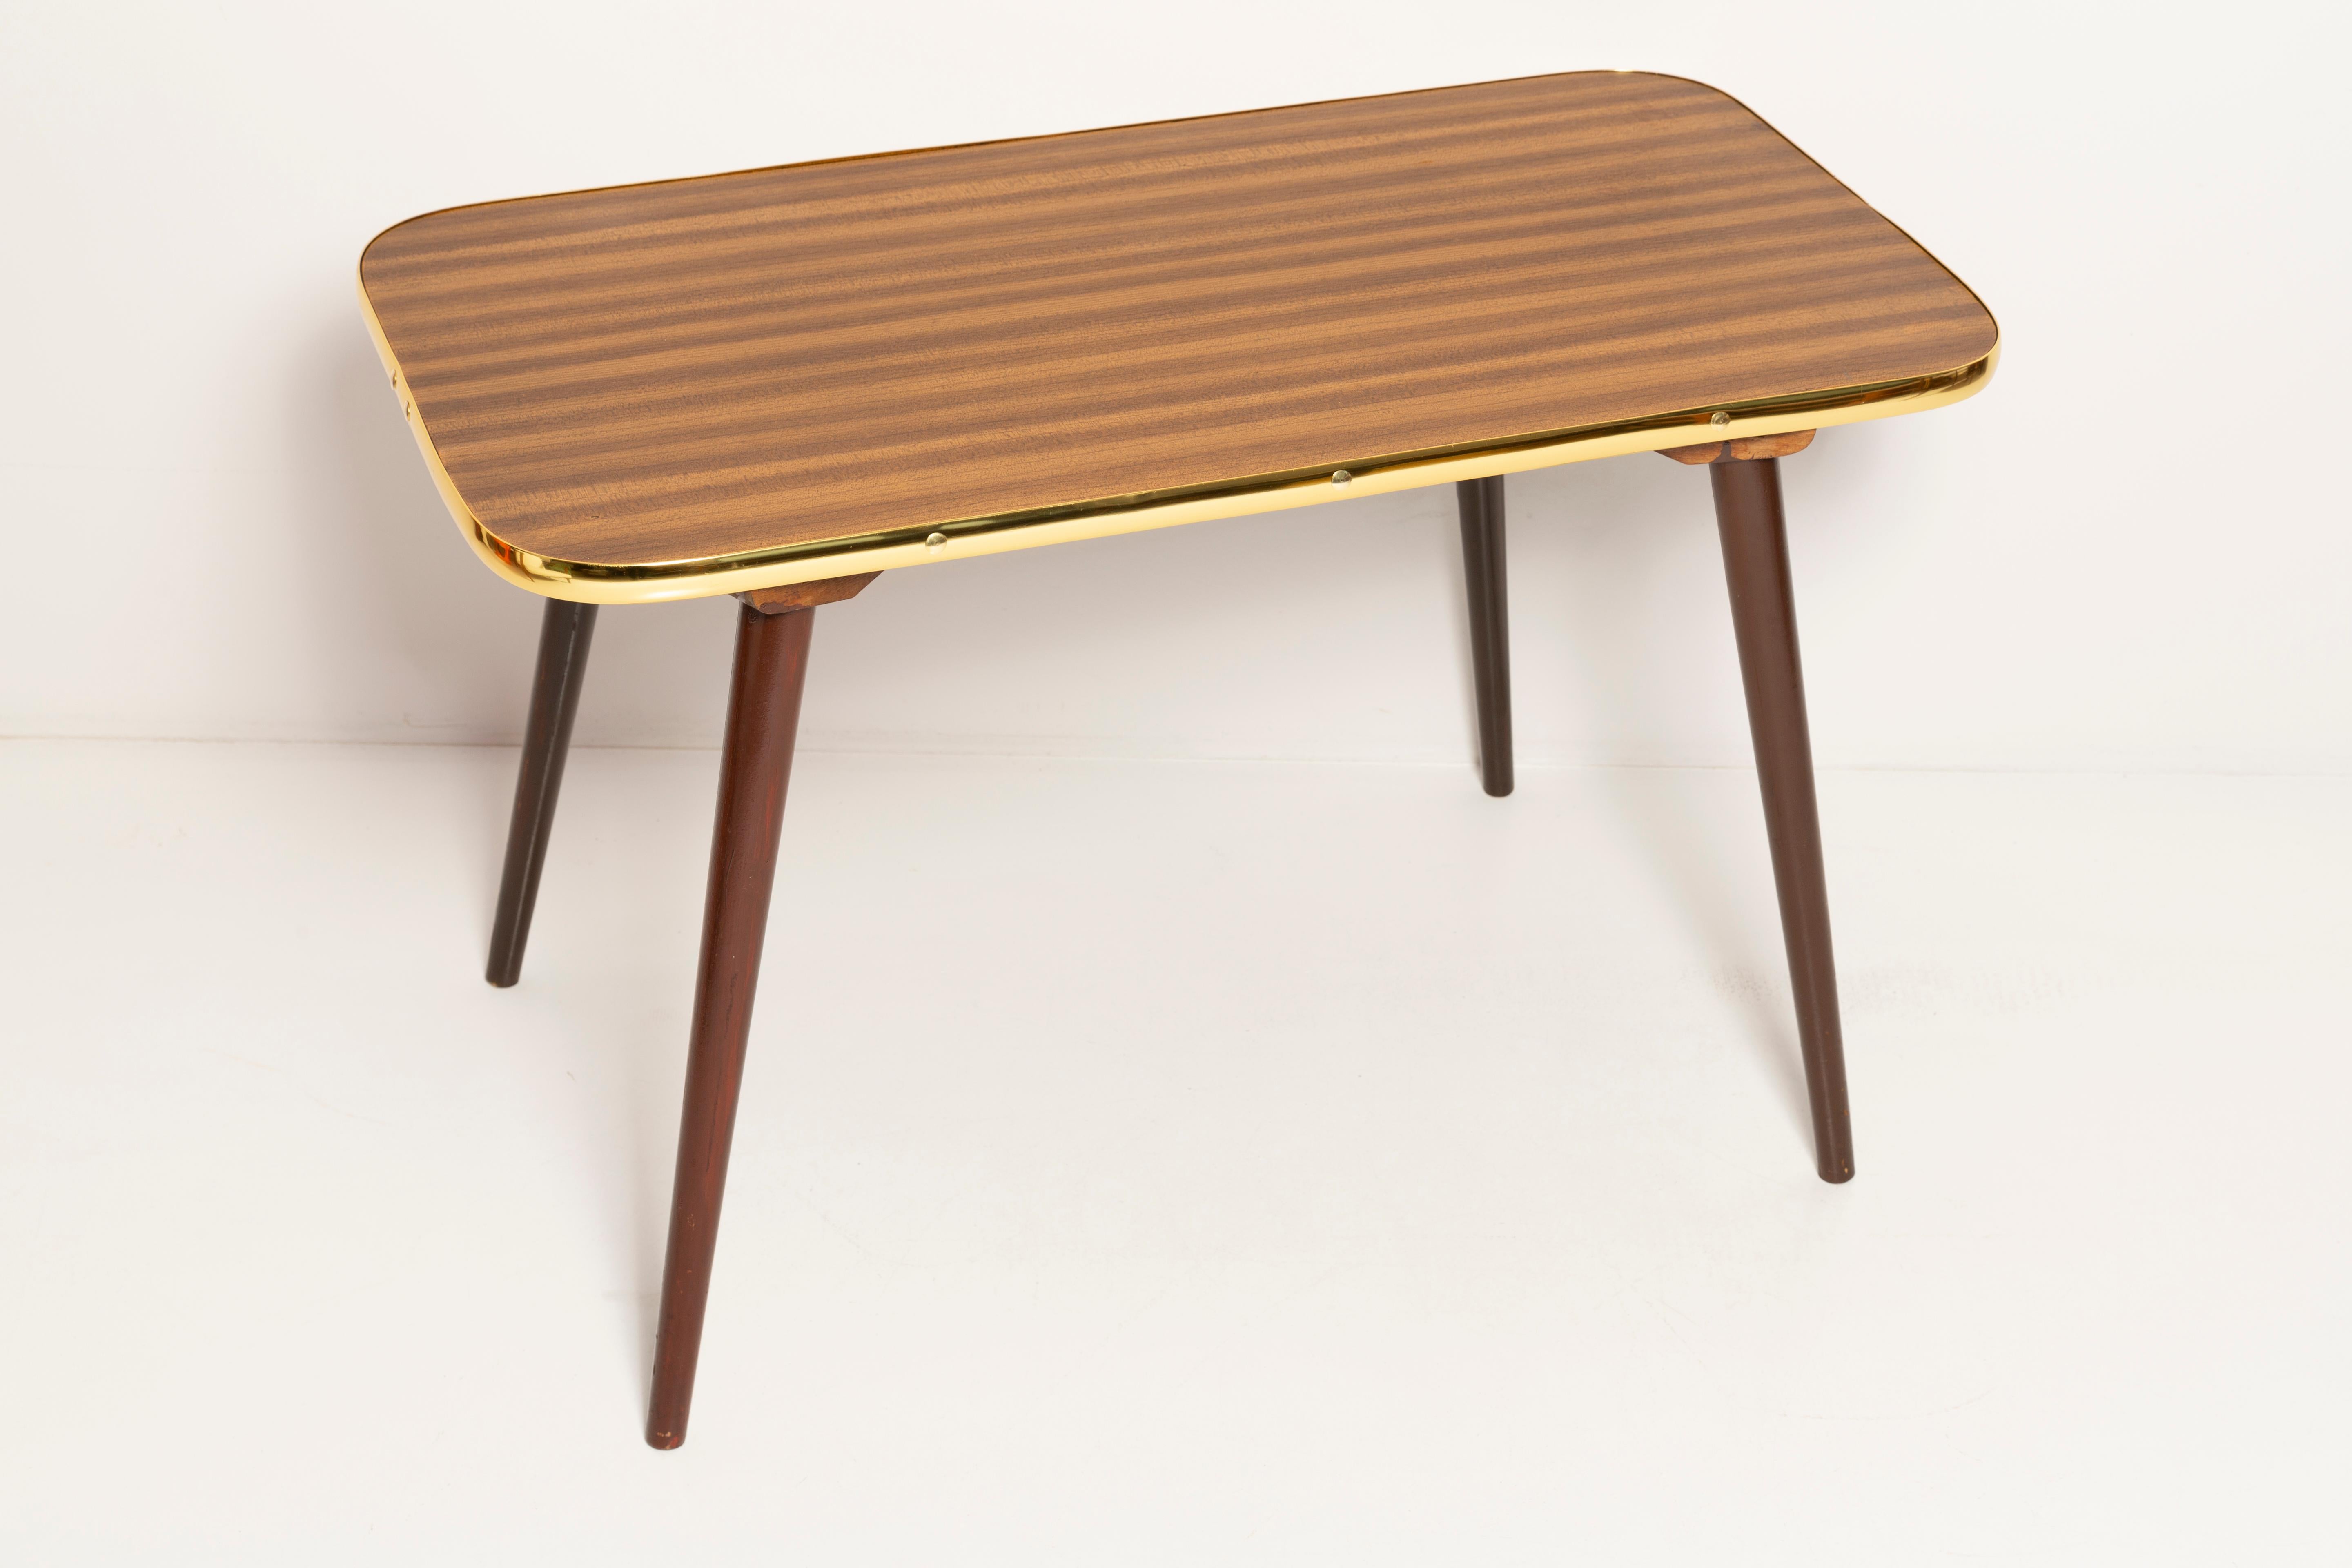 Beech Mid-Century Modern Coffee Table, Hollywood Regency Style, Wood, Poland, 1960s For Sale